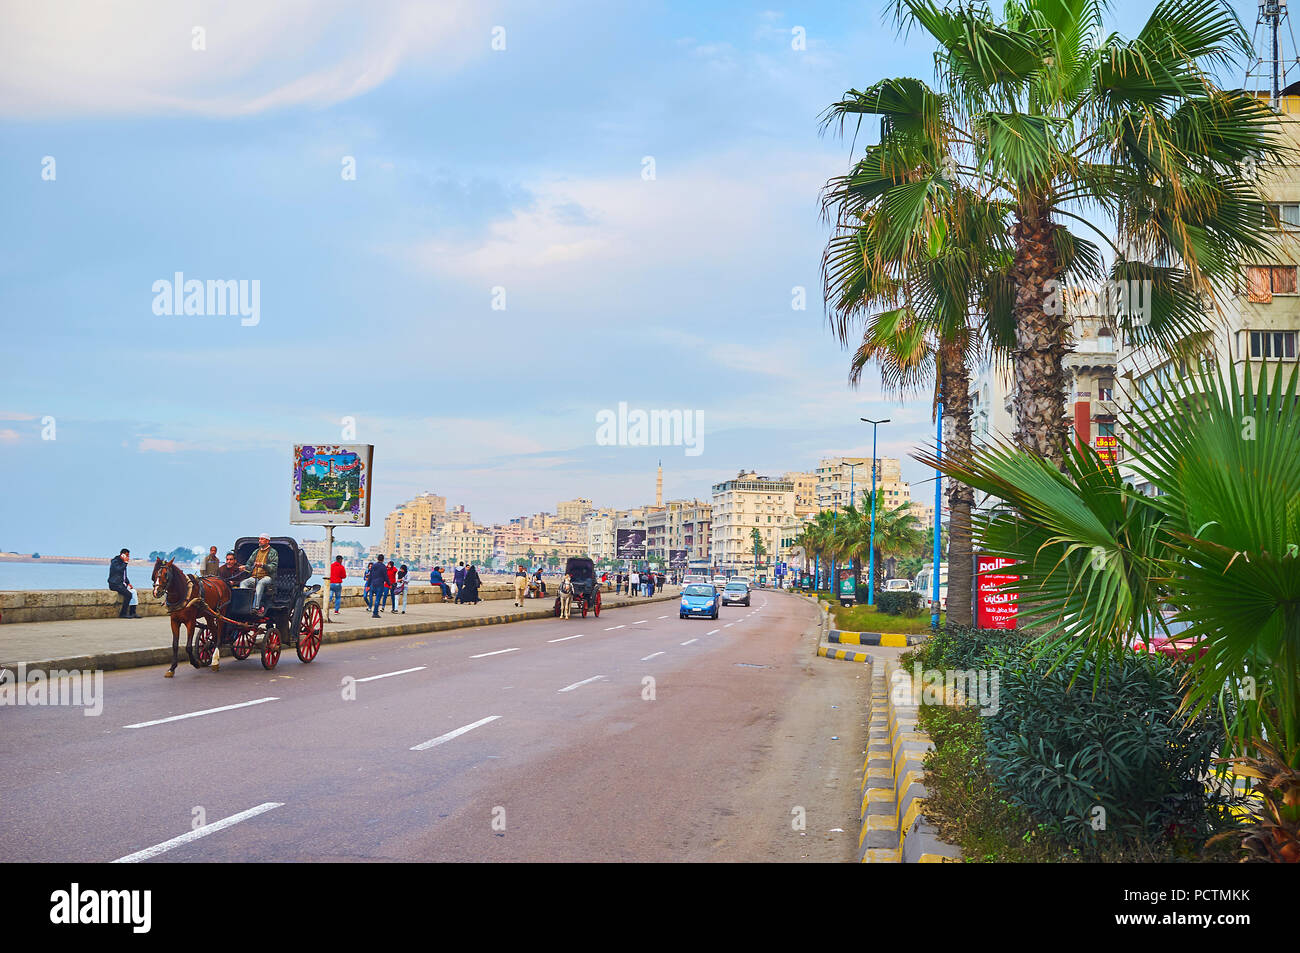 ALEXANDRIA, EGYPT - DECEMBER 18, 2017: The horse-drawn carriages offer joyful riding along the Corniche the central city street, stretching along the  Stock Photo